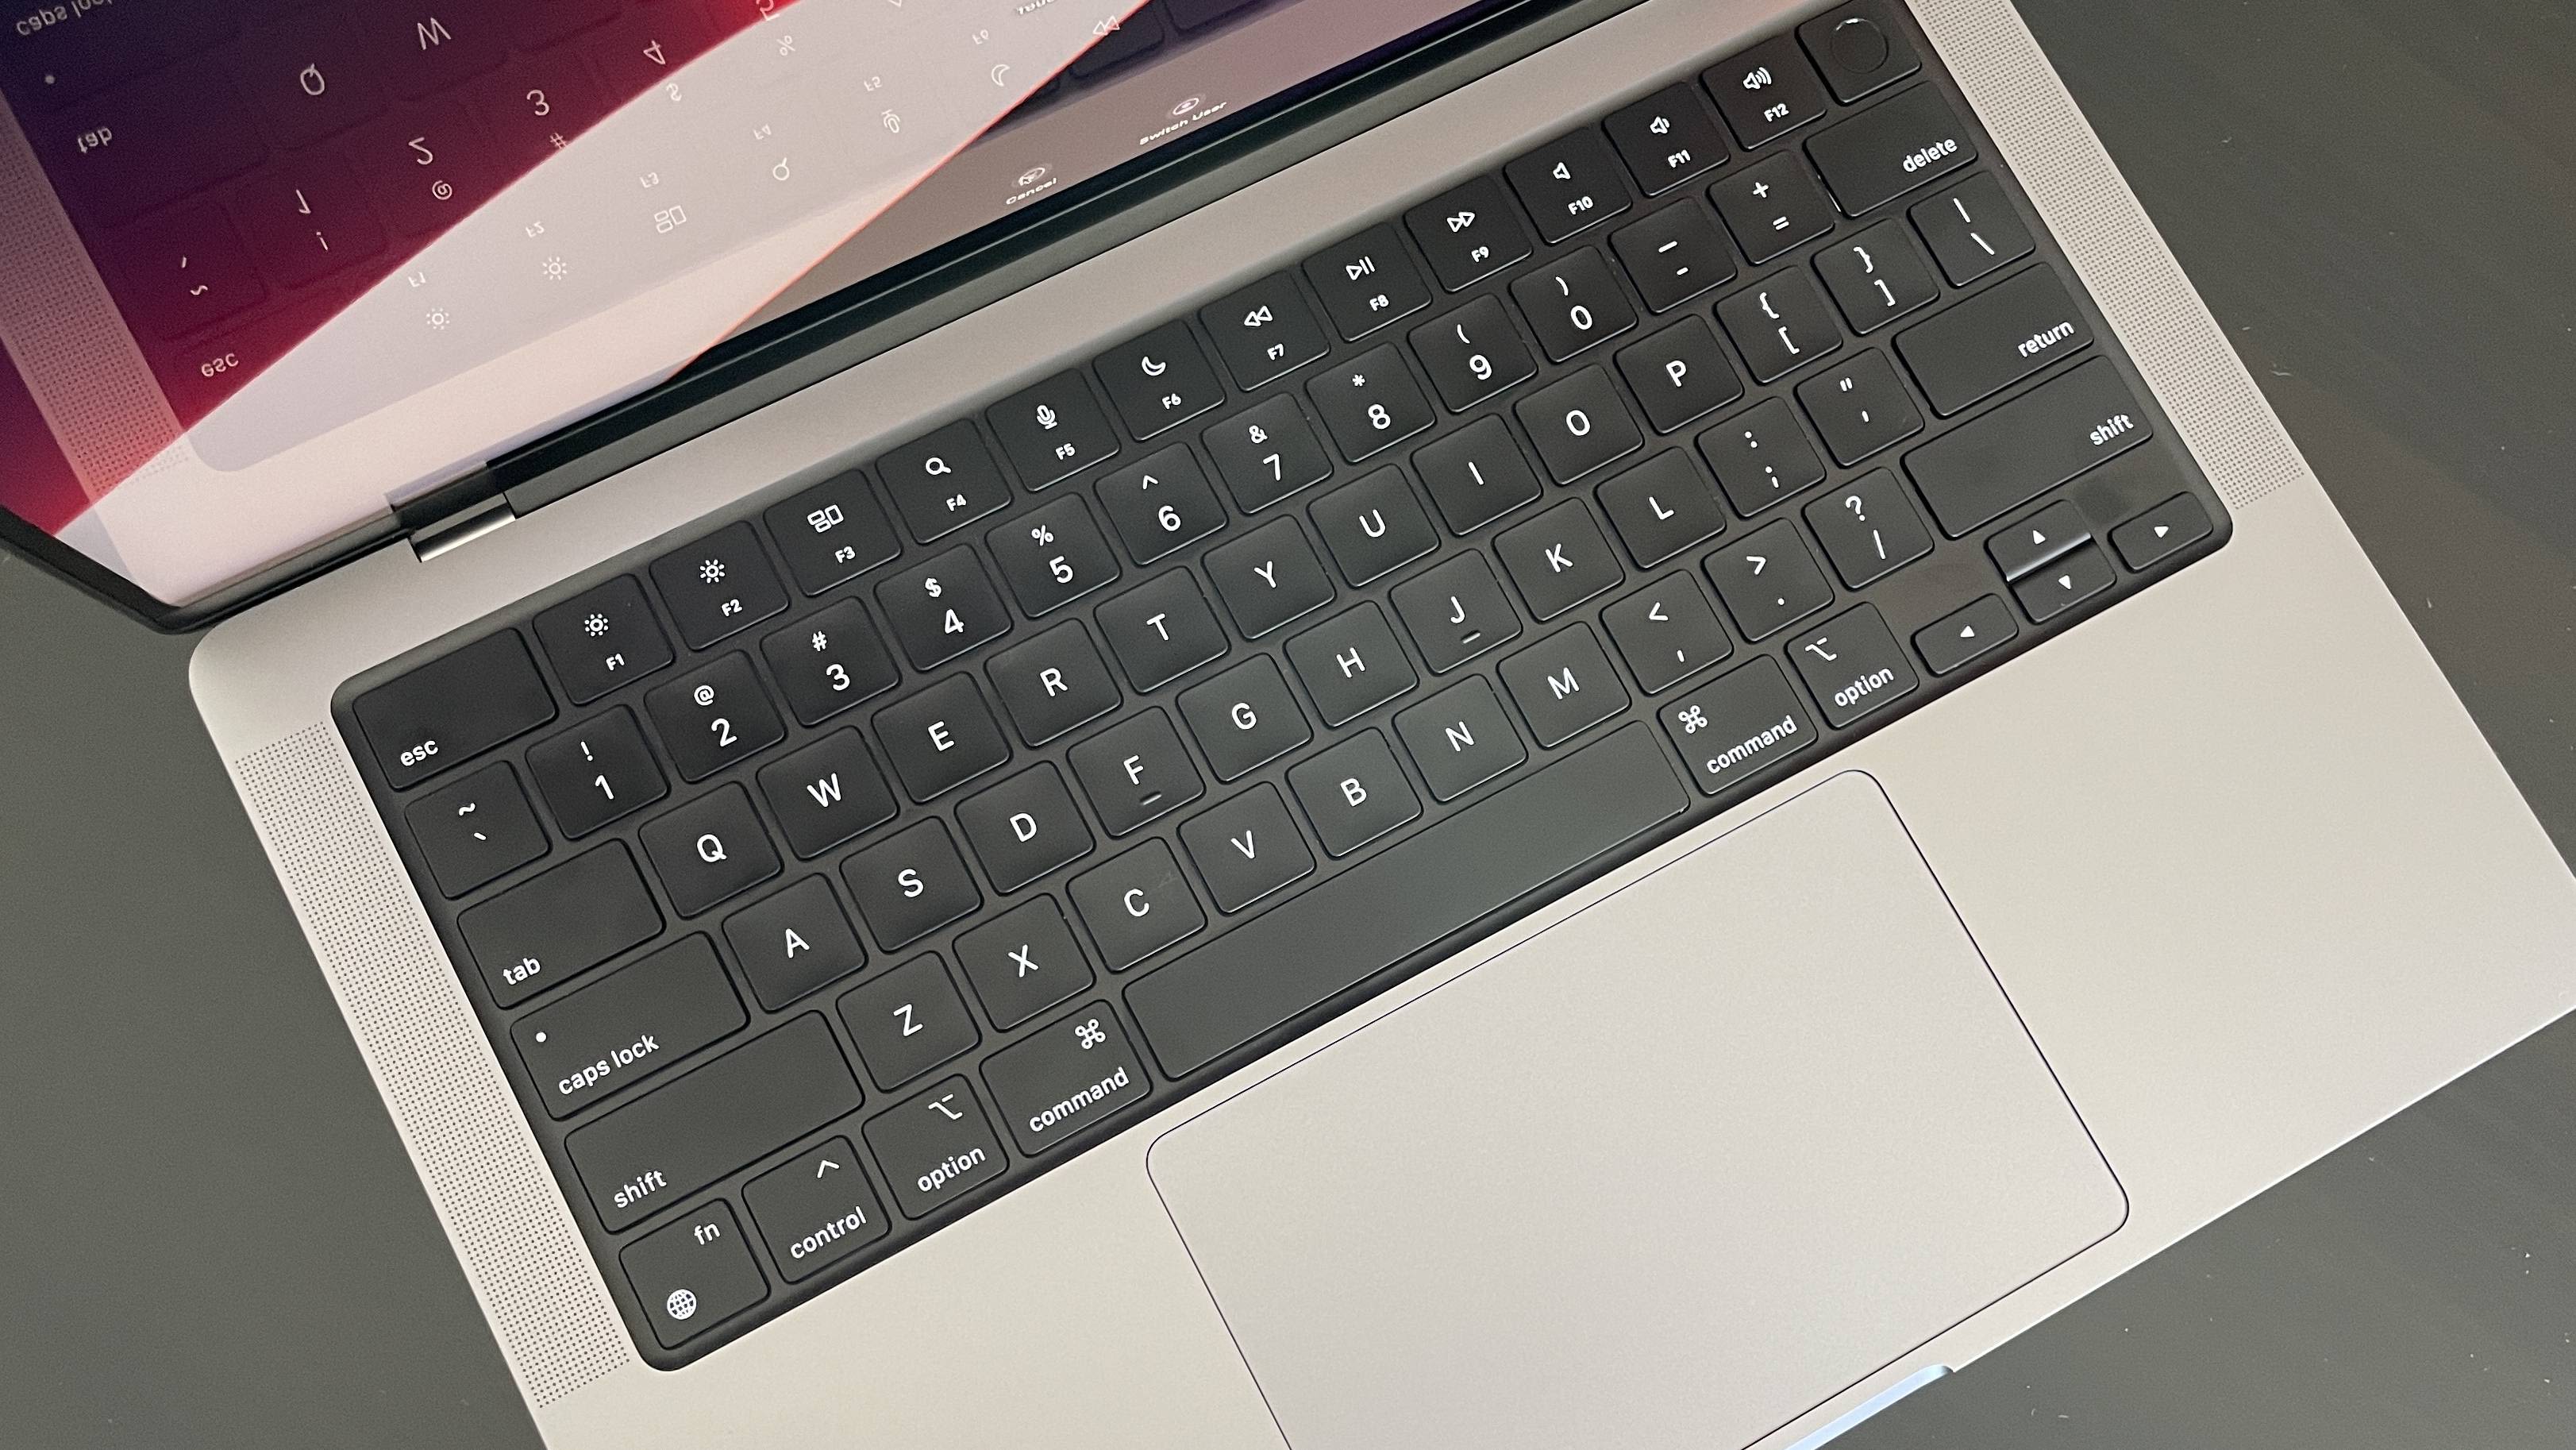 MacBook Pro 14-inch (2021) review: A throwback design with serious new  power